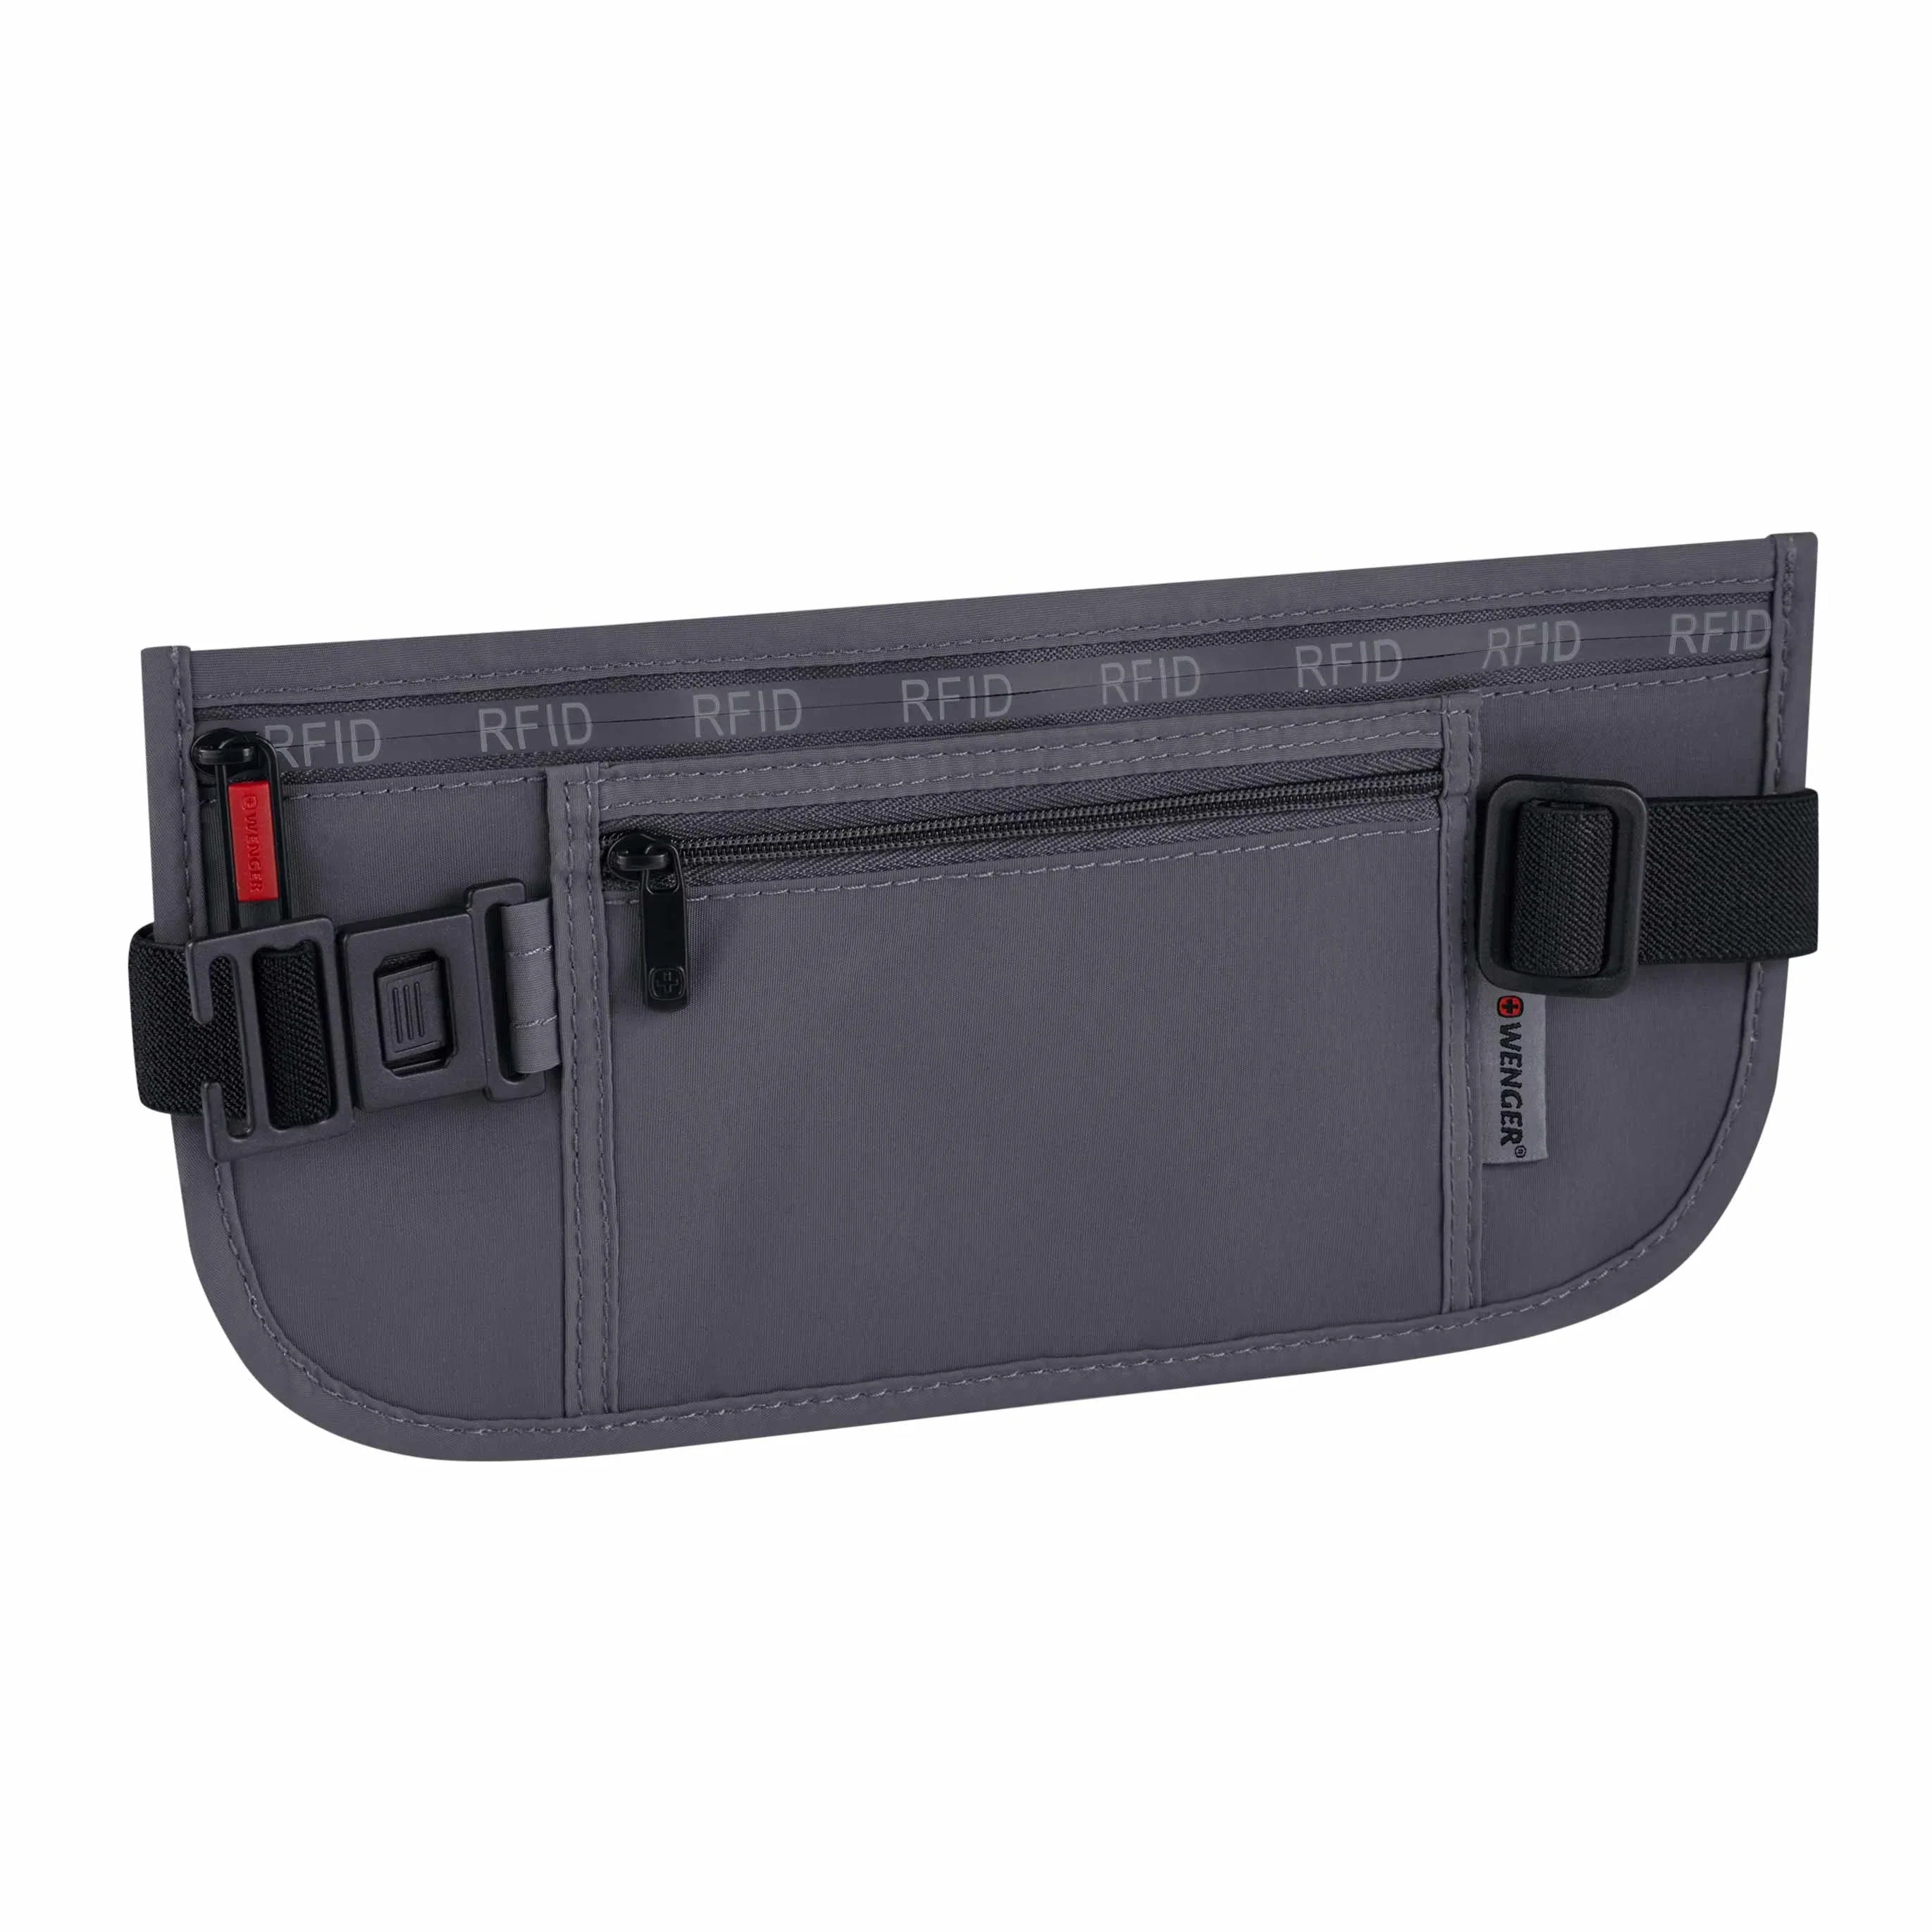 Wenger travel accessories security belt pouch with RFID protection 26 cm - Grey